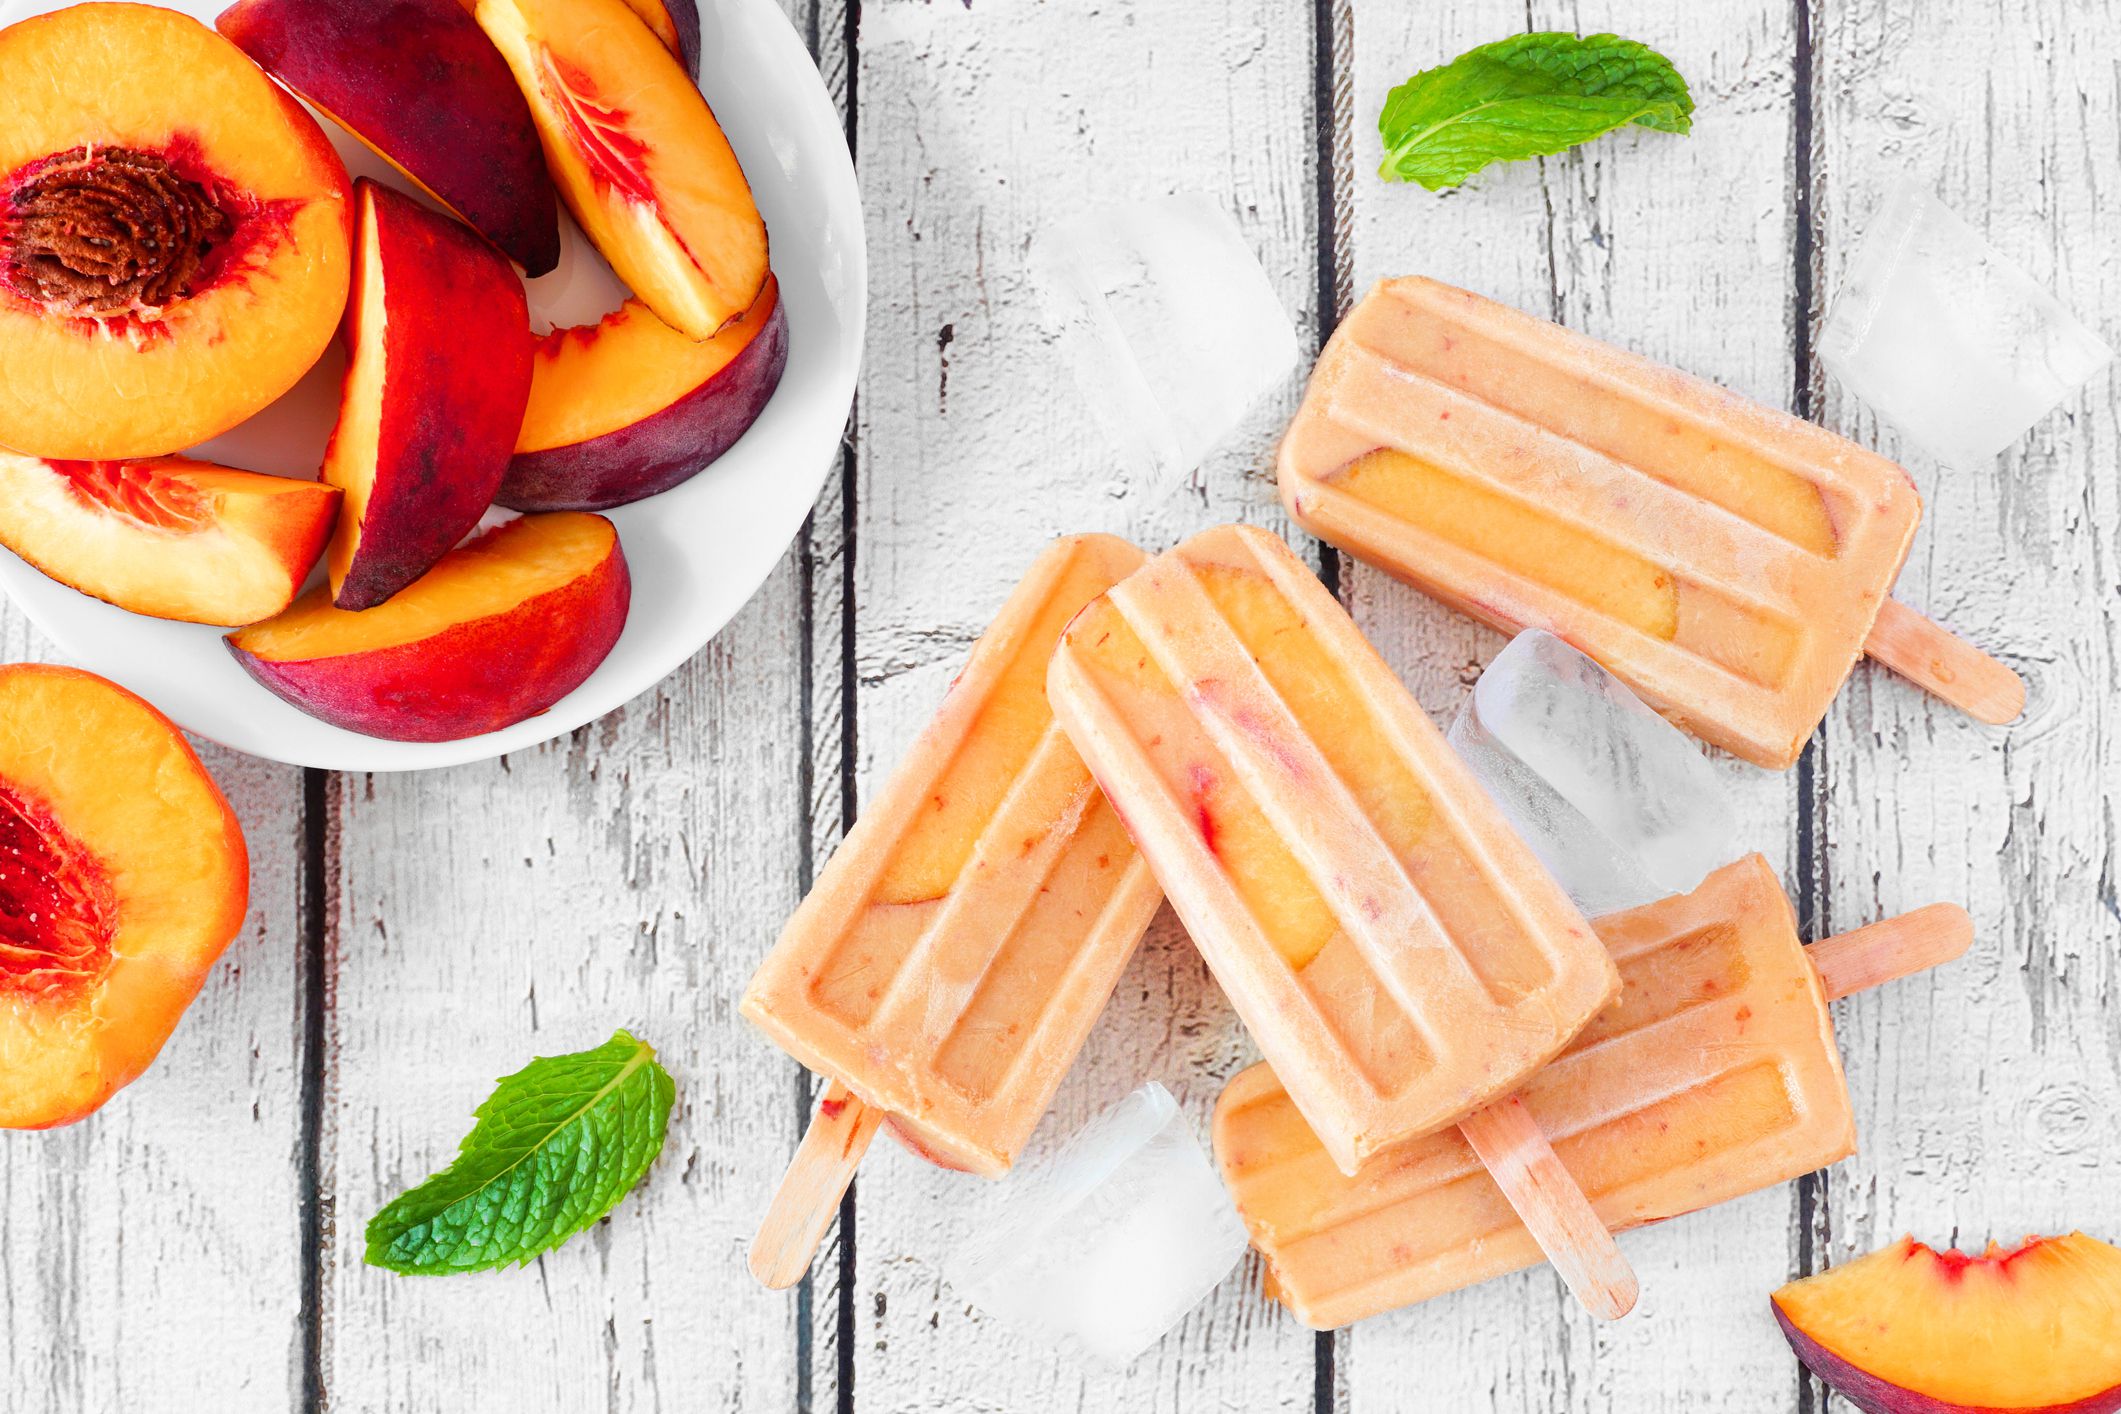 <p>Peach Raspberry Popsicles are easy to make with whole berries and fruit. These homemade ice pops taste way better than anything you can buy in the store- and healthier too!</p><p><a href="https://cincyshopper.com/peach-raspberry-popsicles/">Peach Raspberry Popsicles – CincyShopper</a></p>